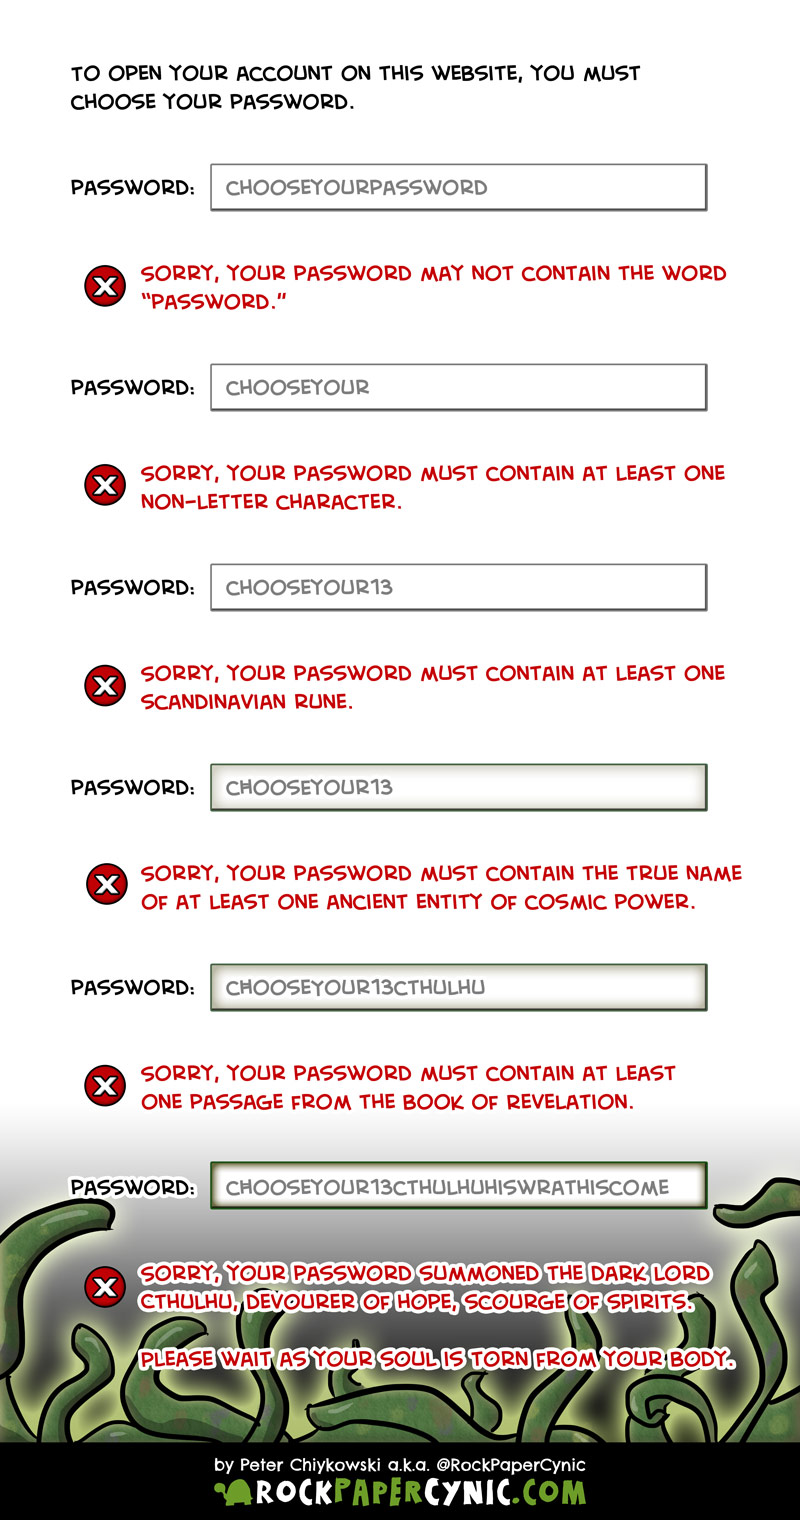 password restrictions are the incantation of pure evil